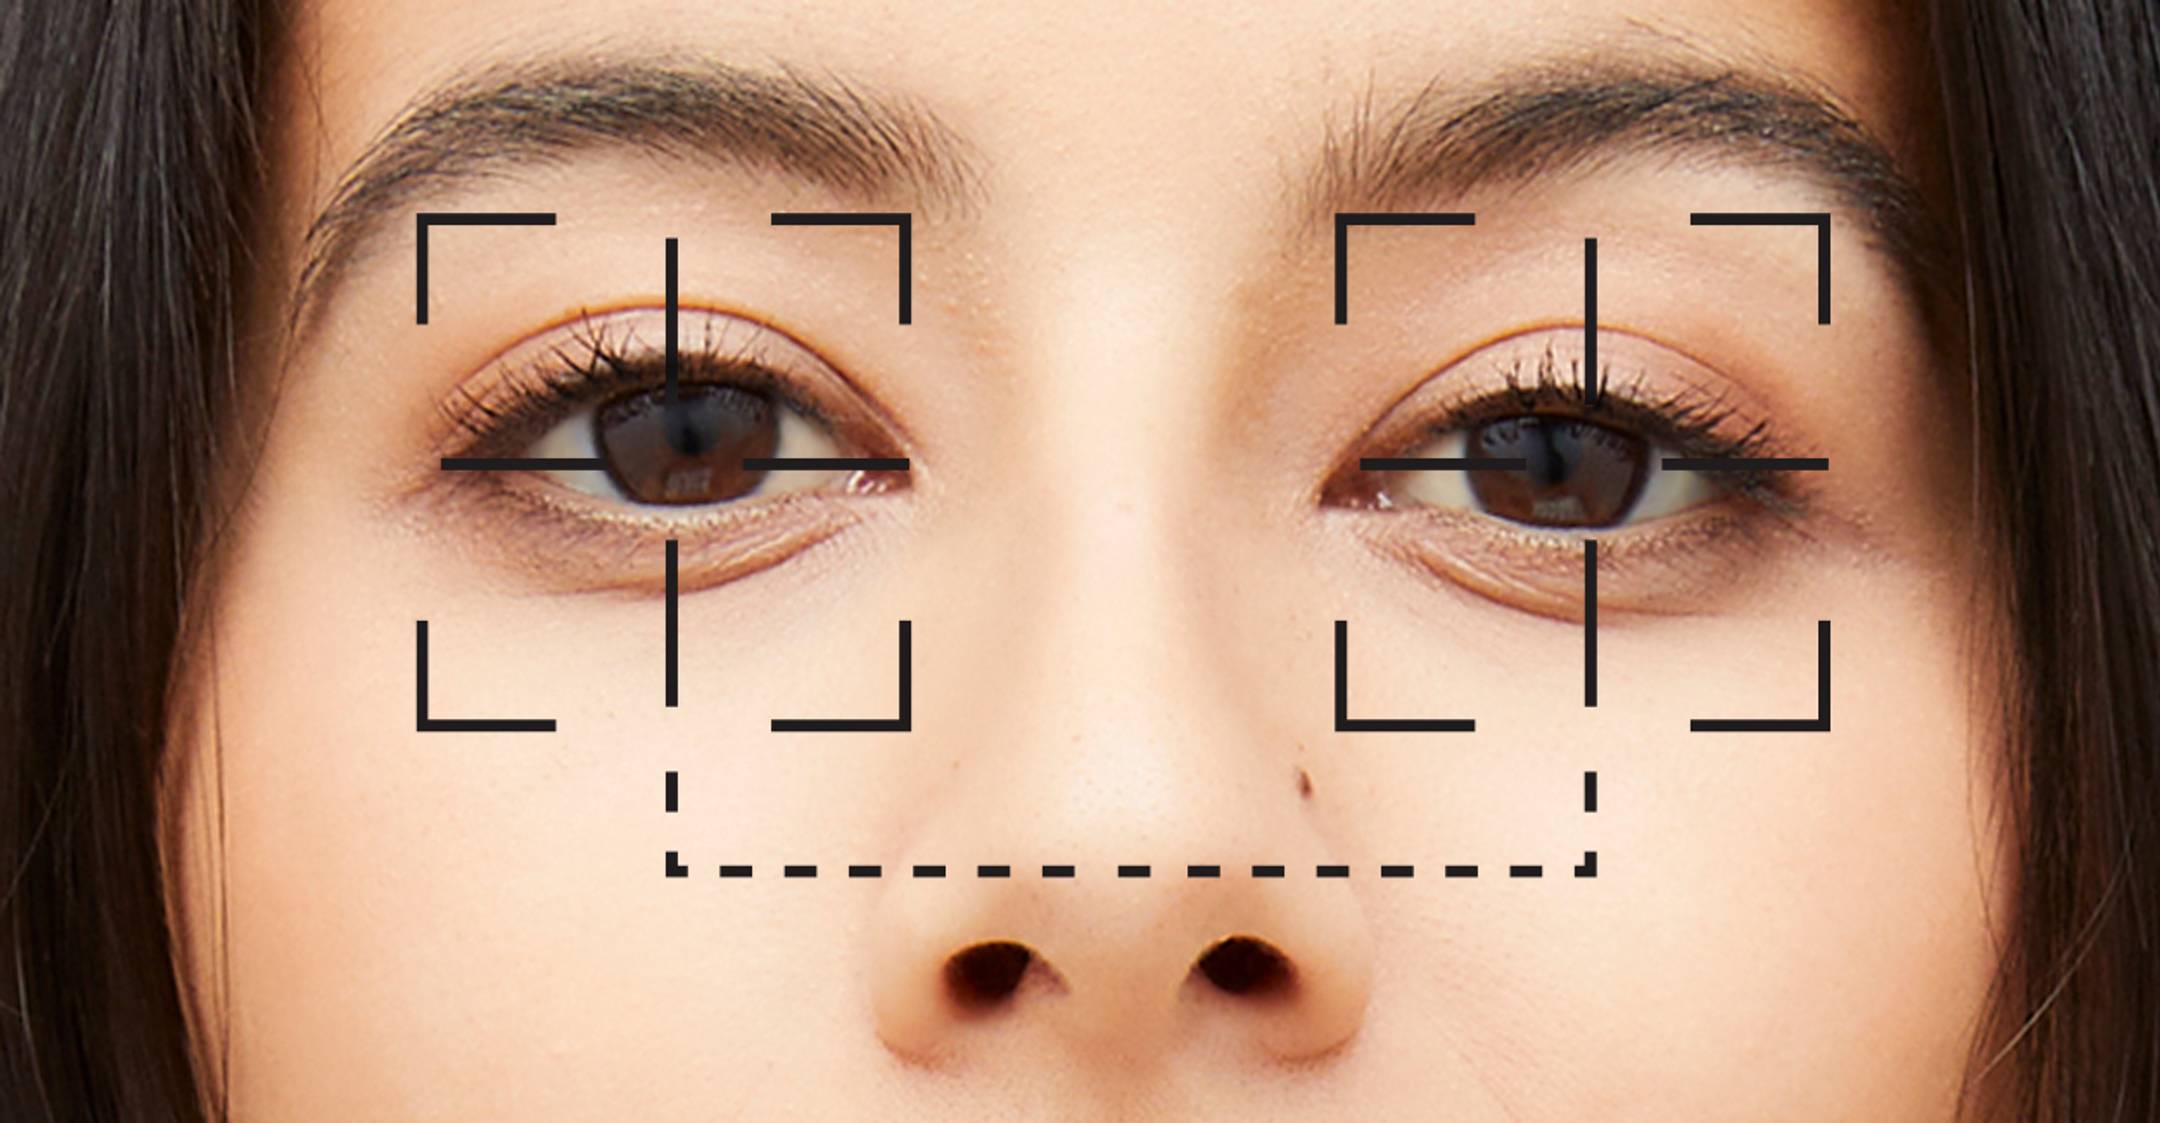 Female model with cross hairs over her eyes